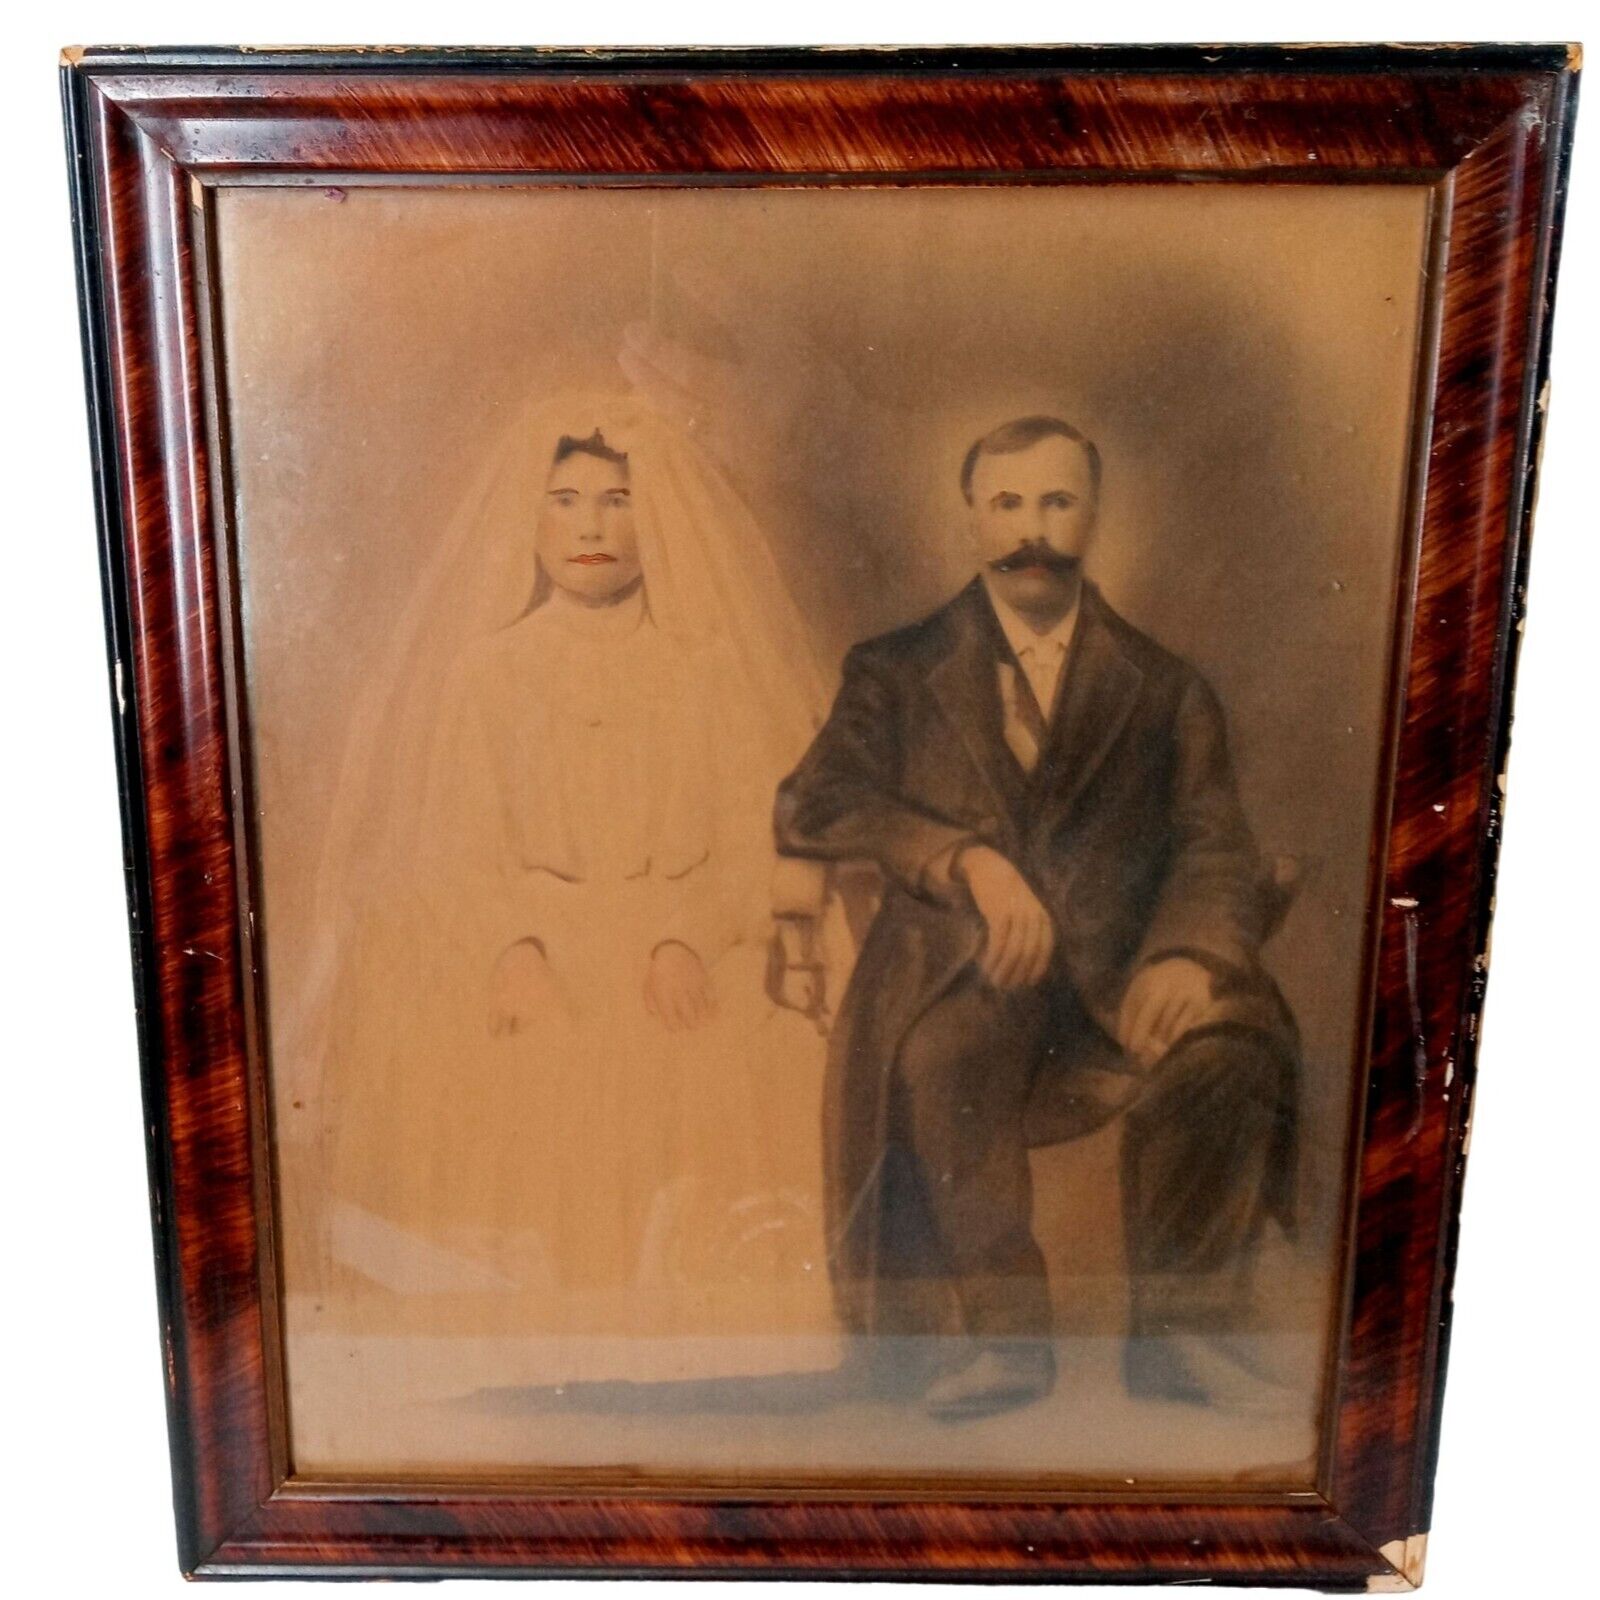 Antique Wedding Photo Framed Photograph Wall Art Decor Red Tinted Lips Vintage